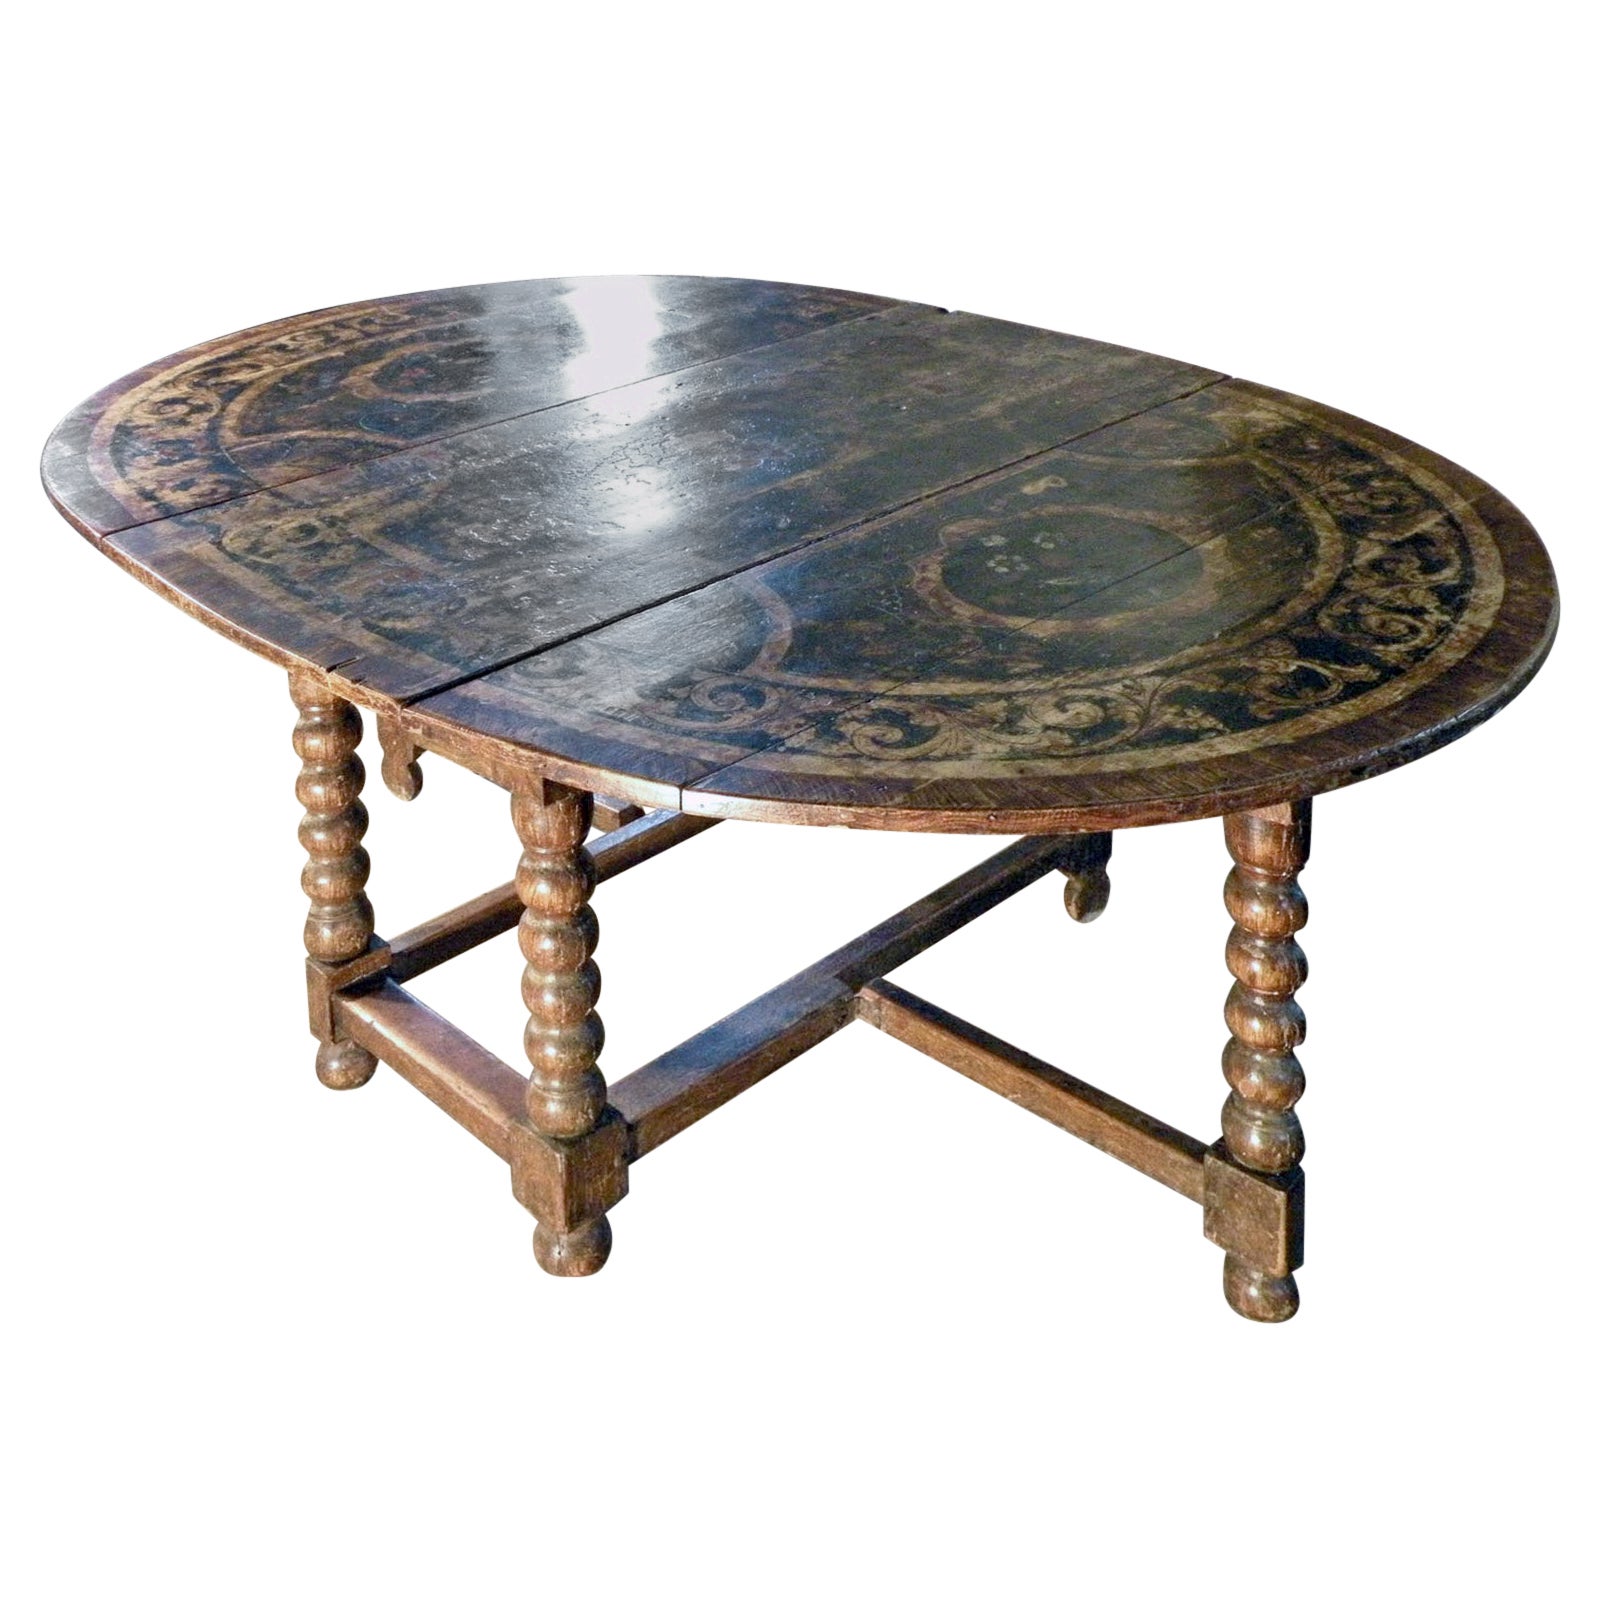 Dutch 17th Century Painted Large Oval Gate-Leg Dining Table For Sale